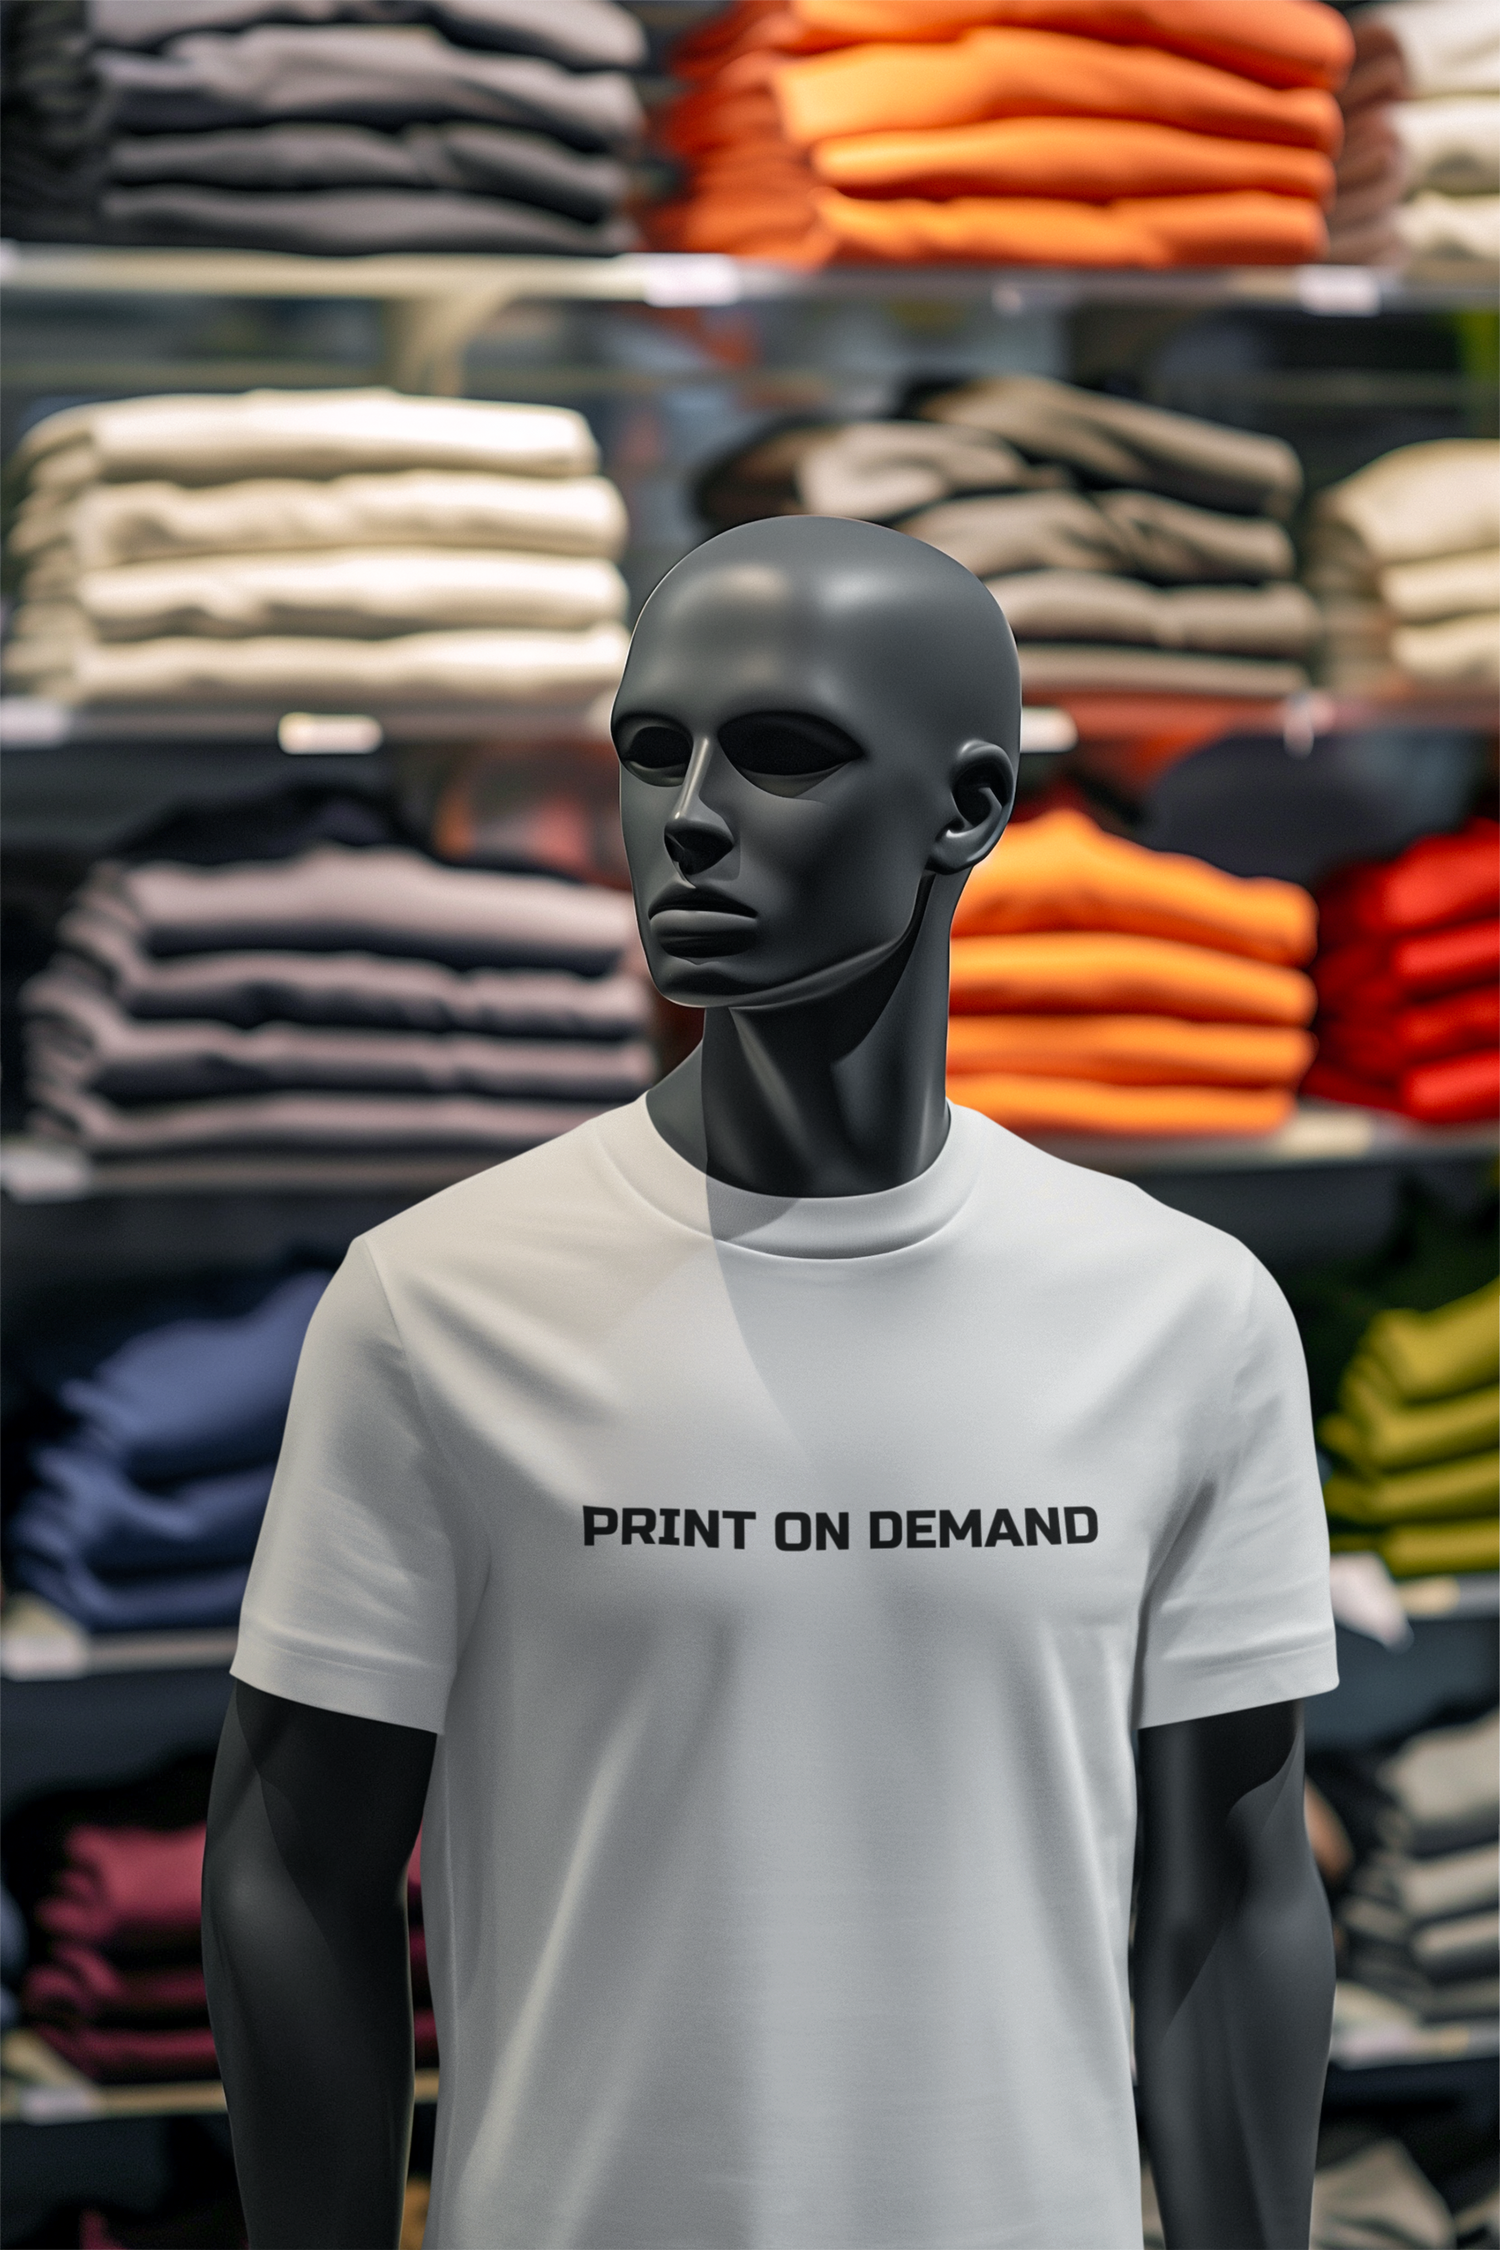 Print on Demand for your brand